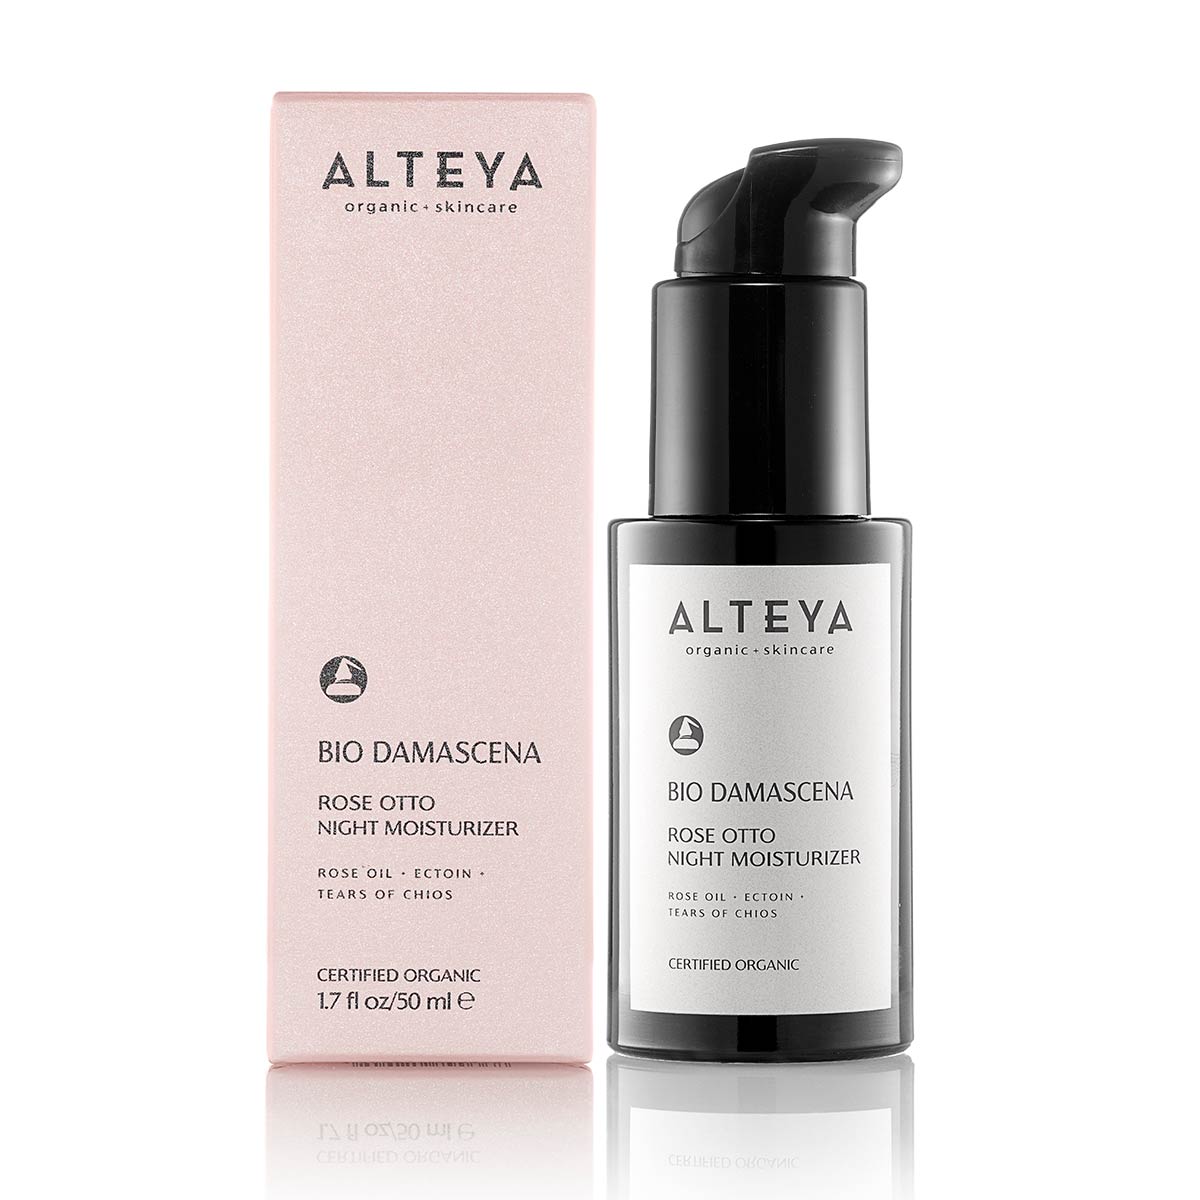 skin-care-Organic-Rose-Otto-Night-Moisturizer-Bio-Damascena-alteya-organics - Apply onto face, neck and décolleté in the evening after toning and cleansing. Massage with up and out sweeping motions.